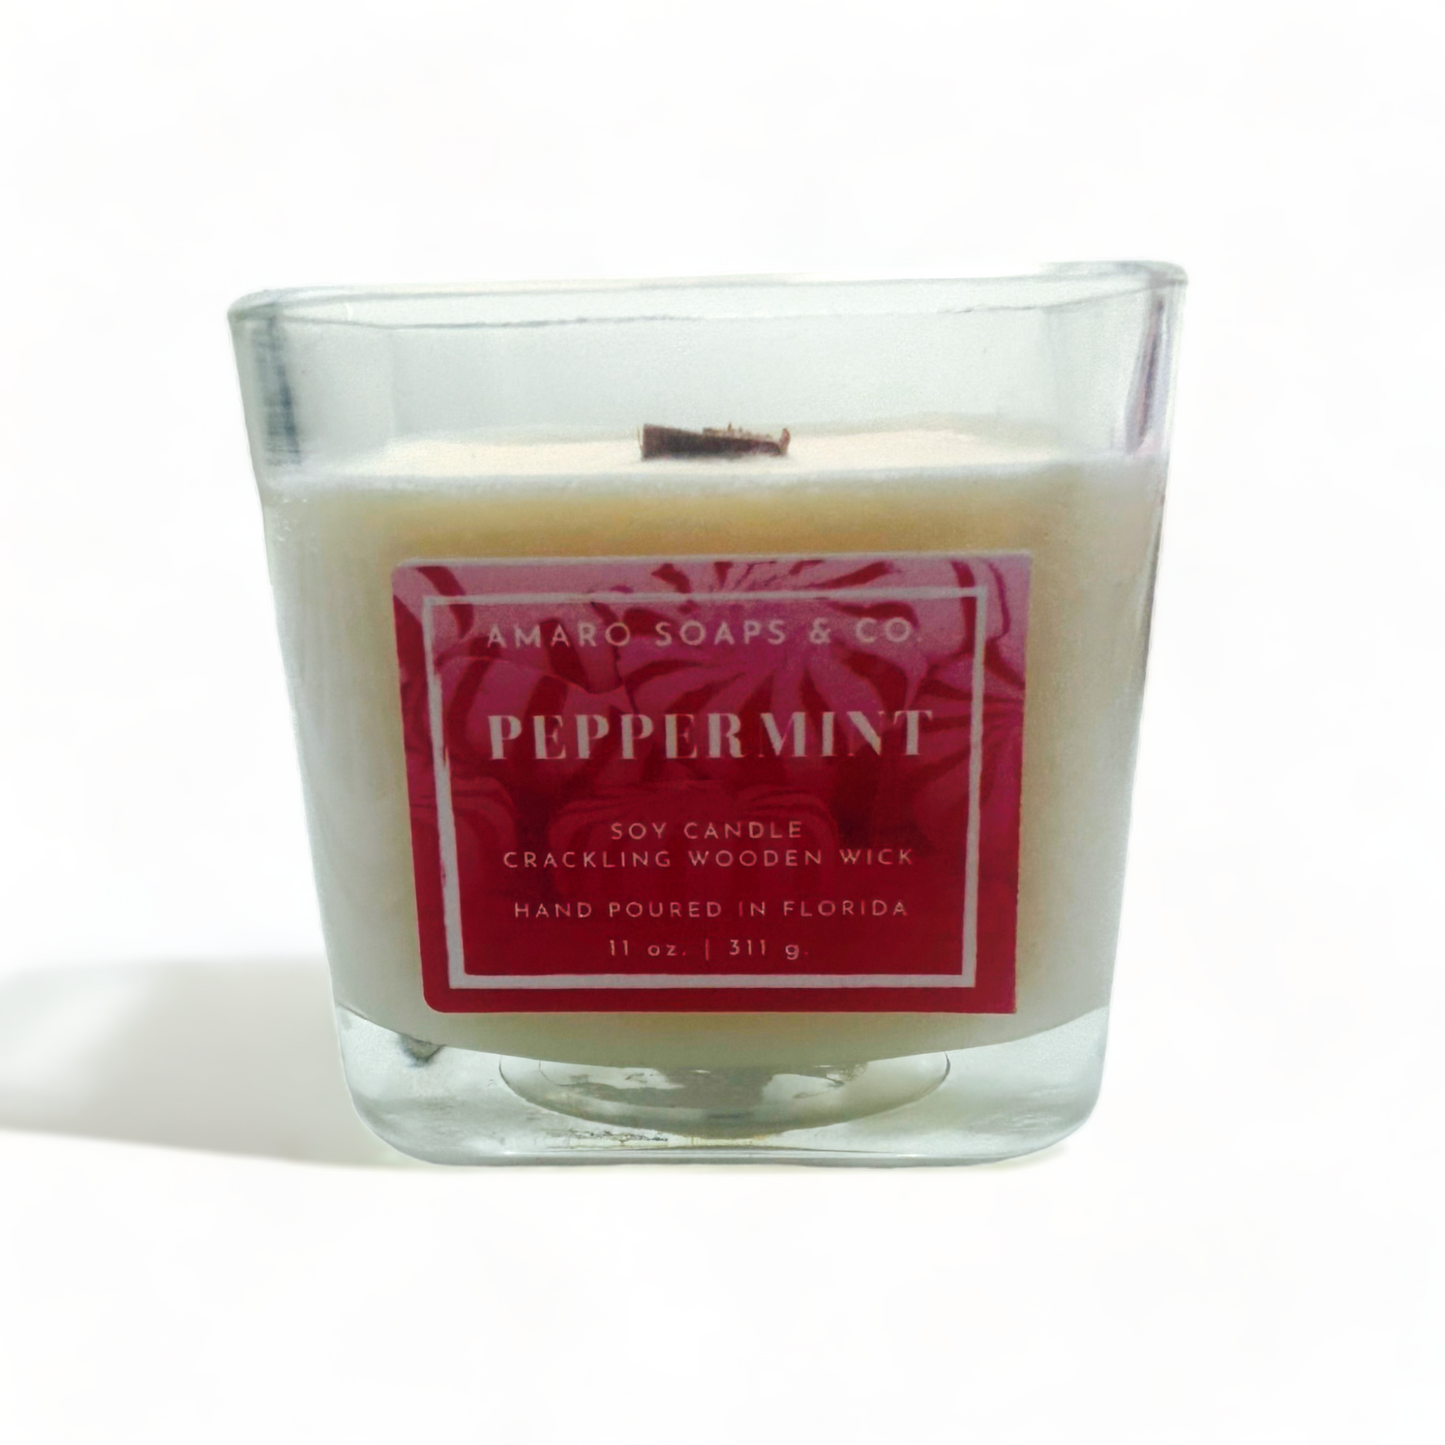 Peppermint Wooden Wick Soy Candle